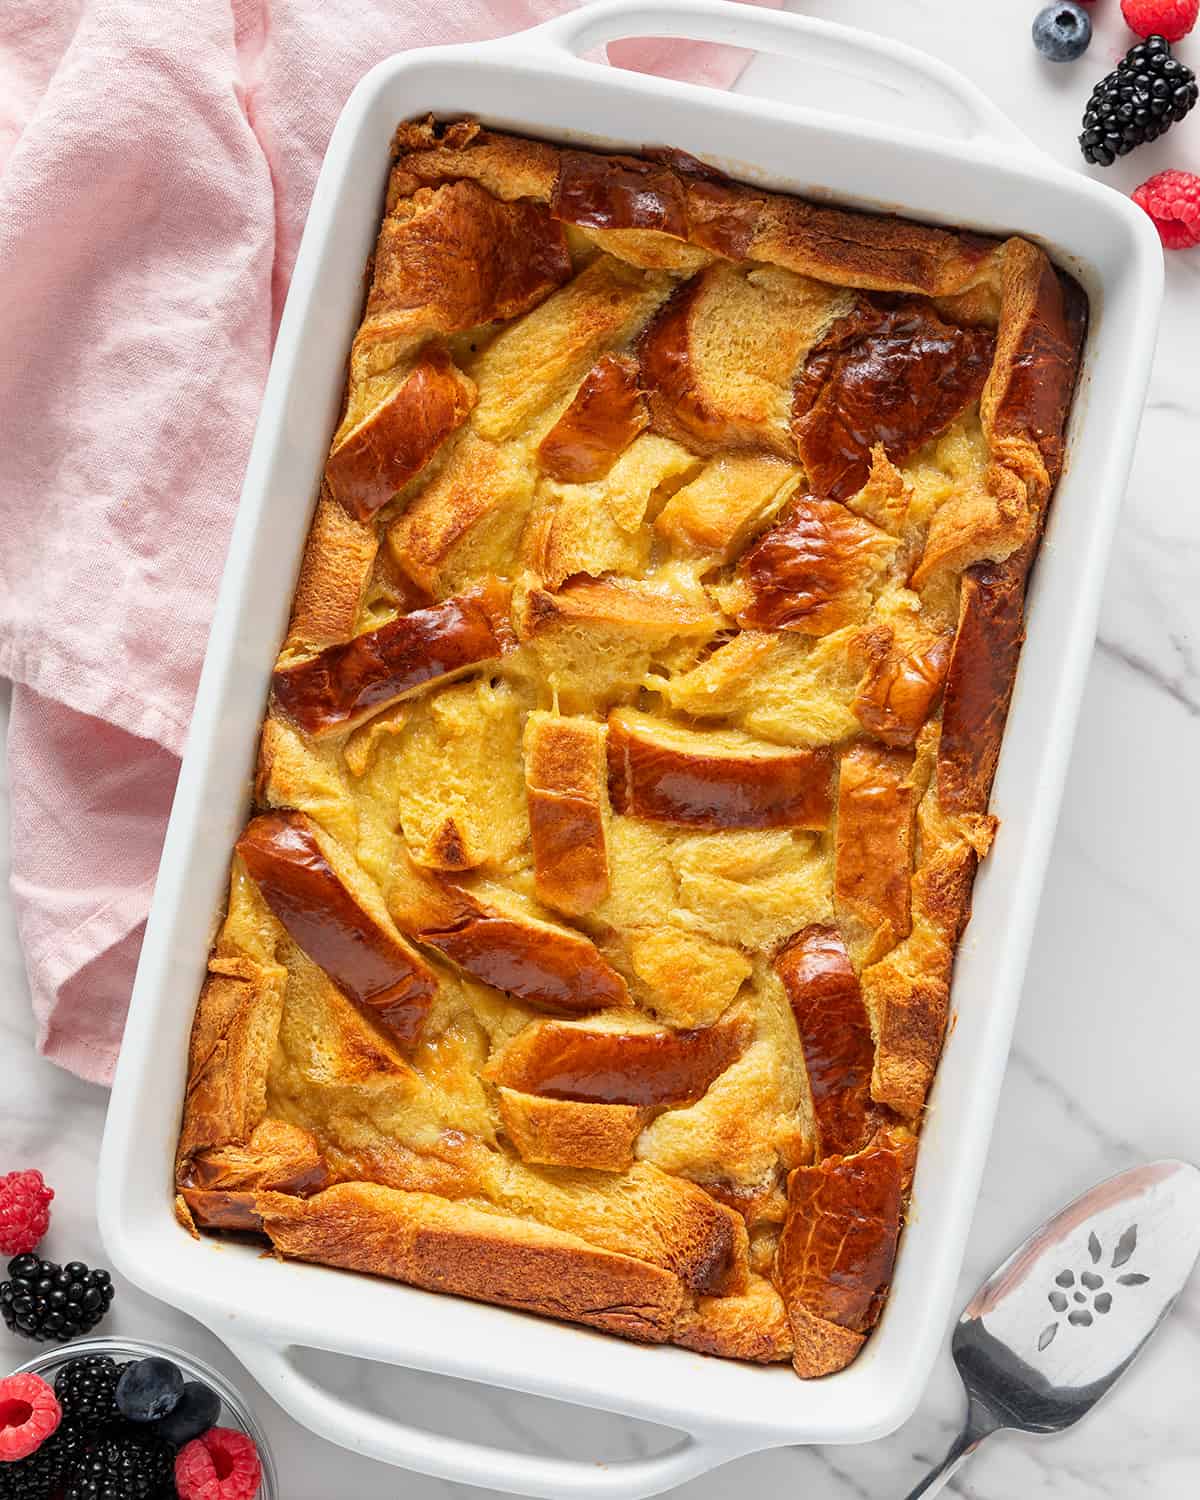 Bread Pudding in a baking dish